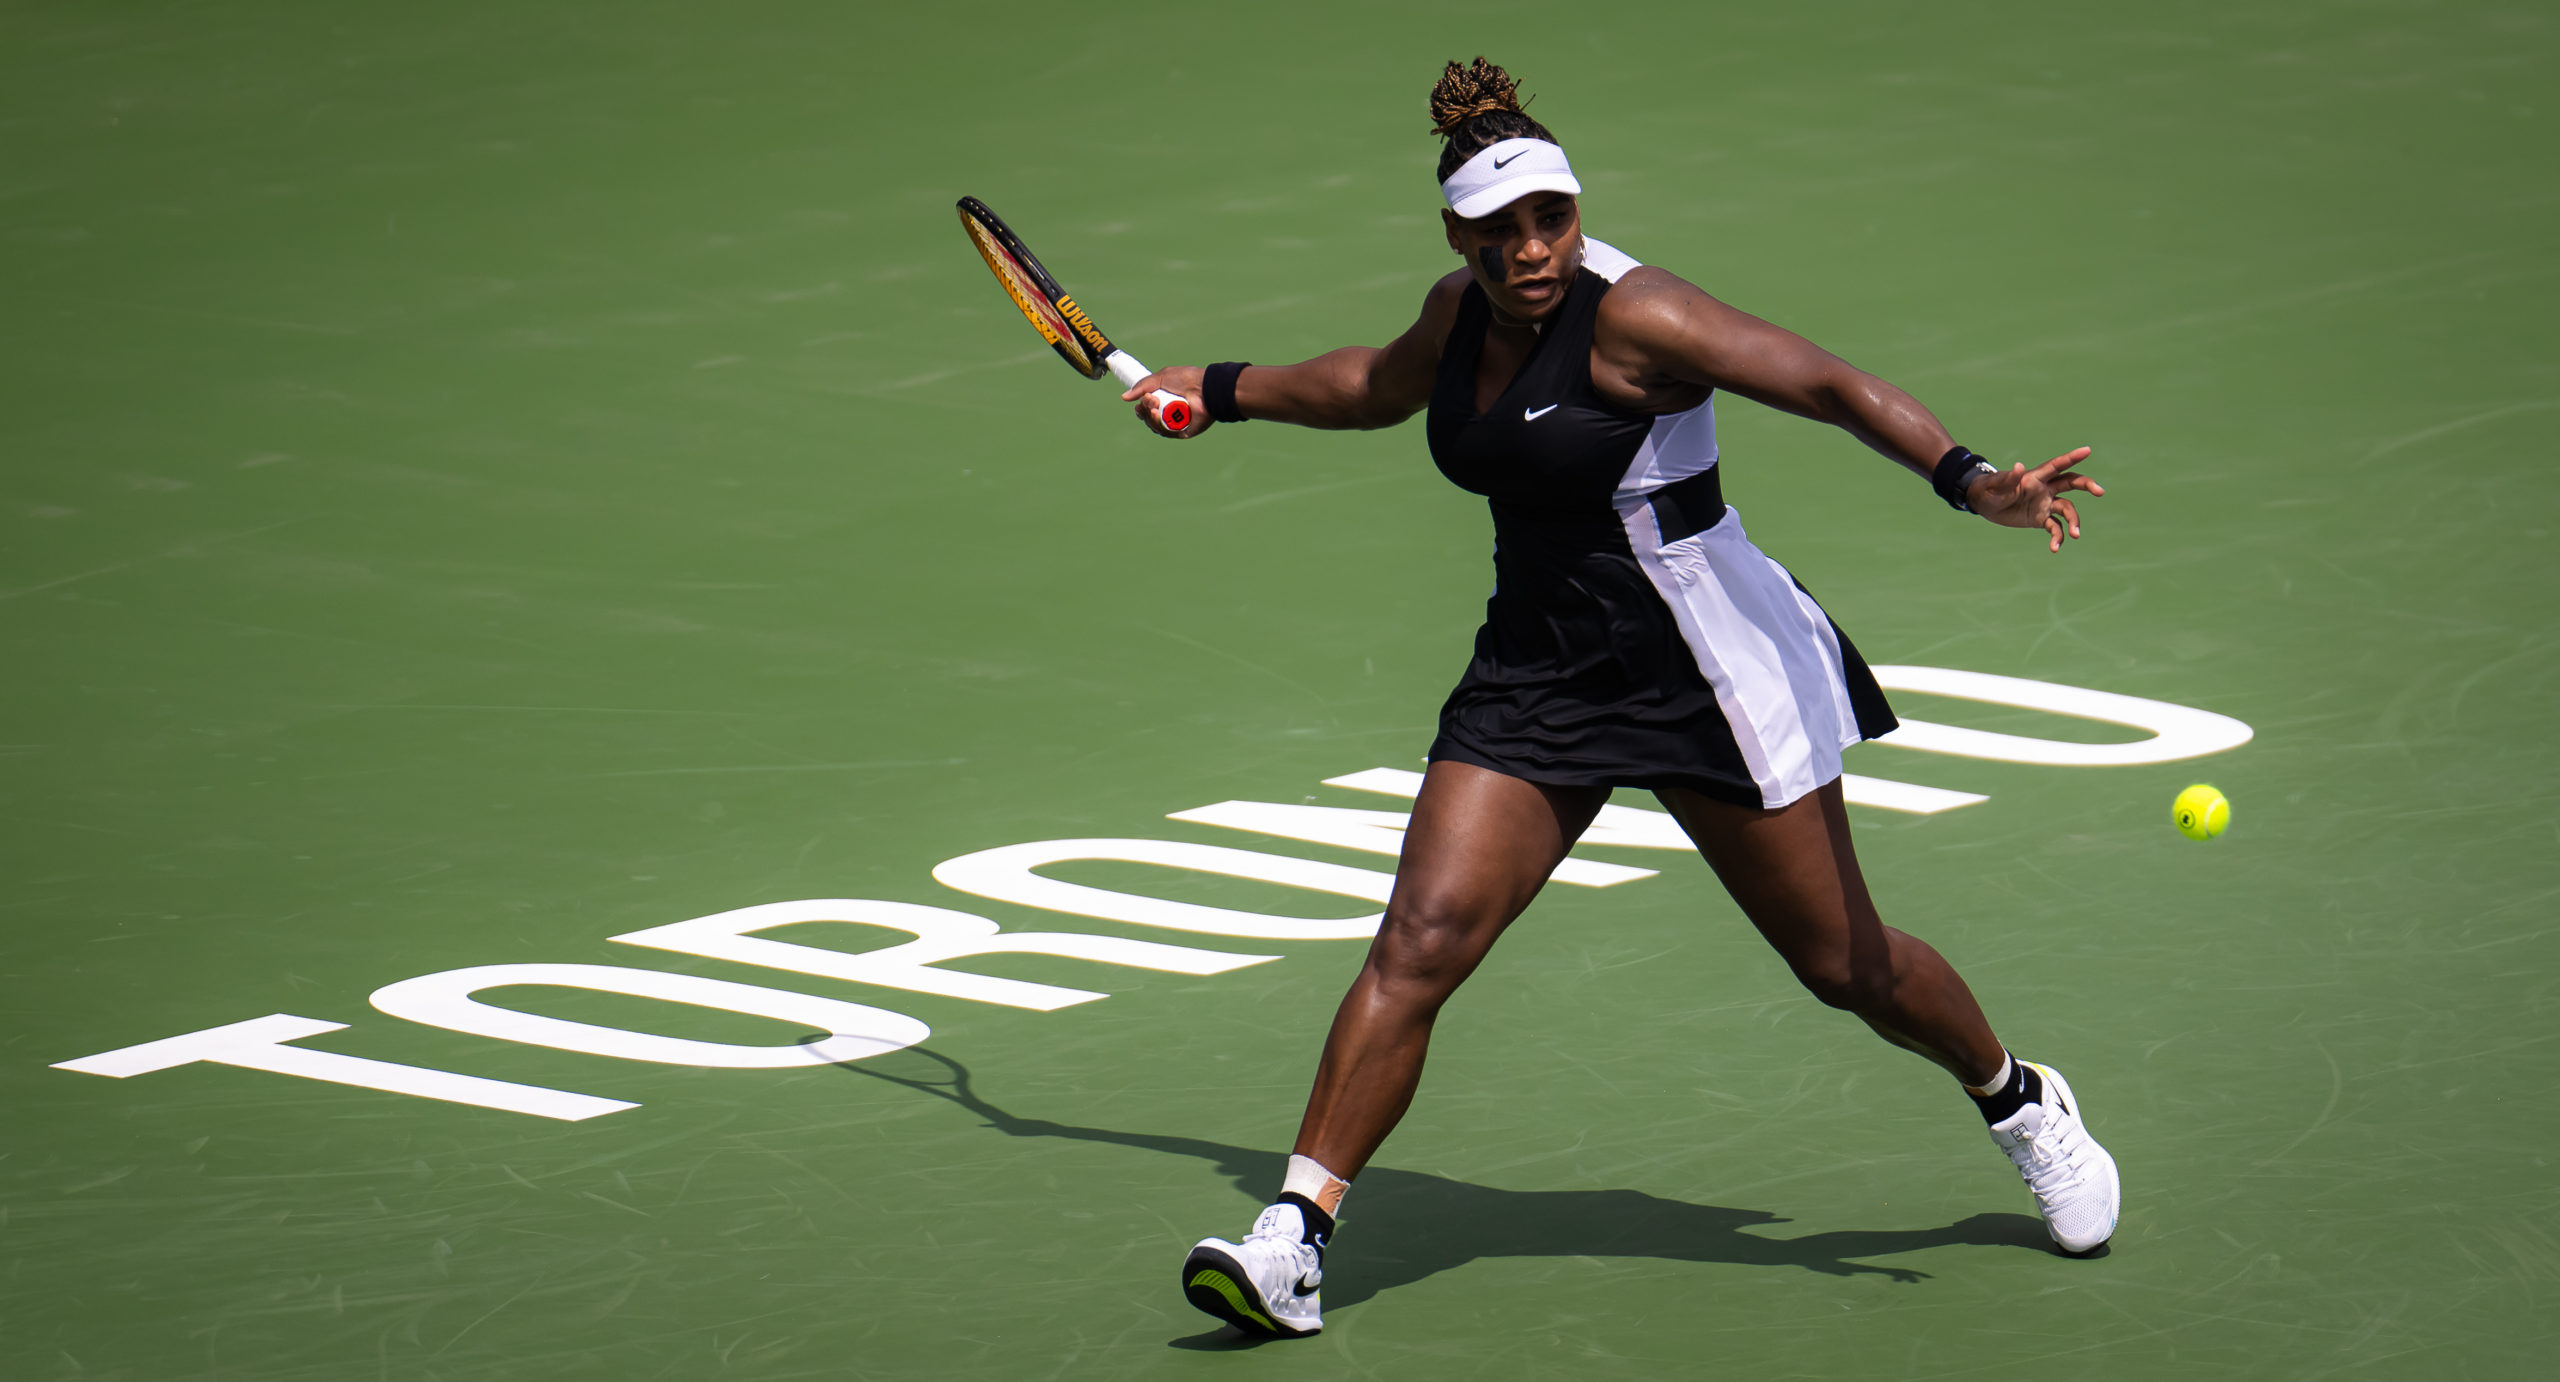 Serena Williams of the United States hits a shot against Nuria Parrizas Diaz of Spain during her fi...